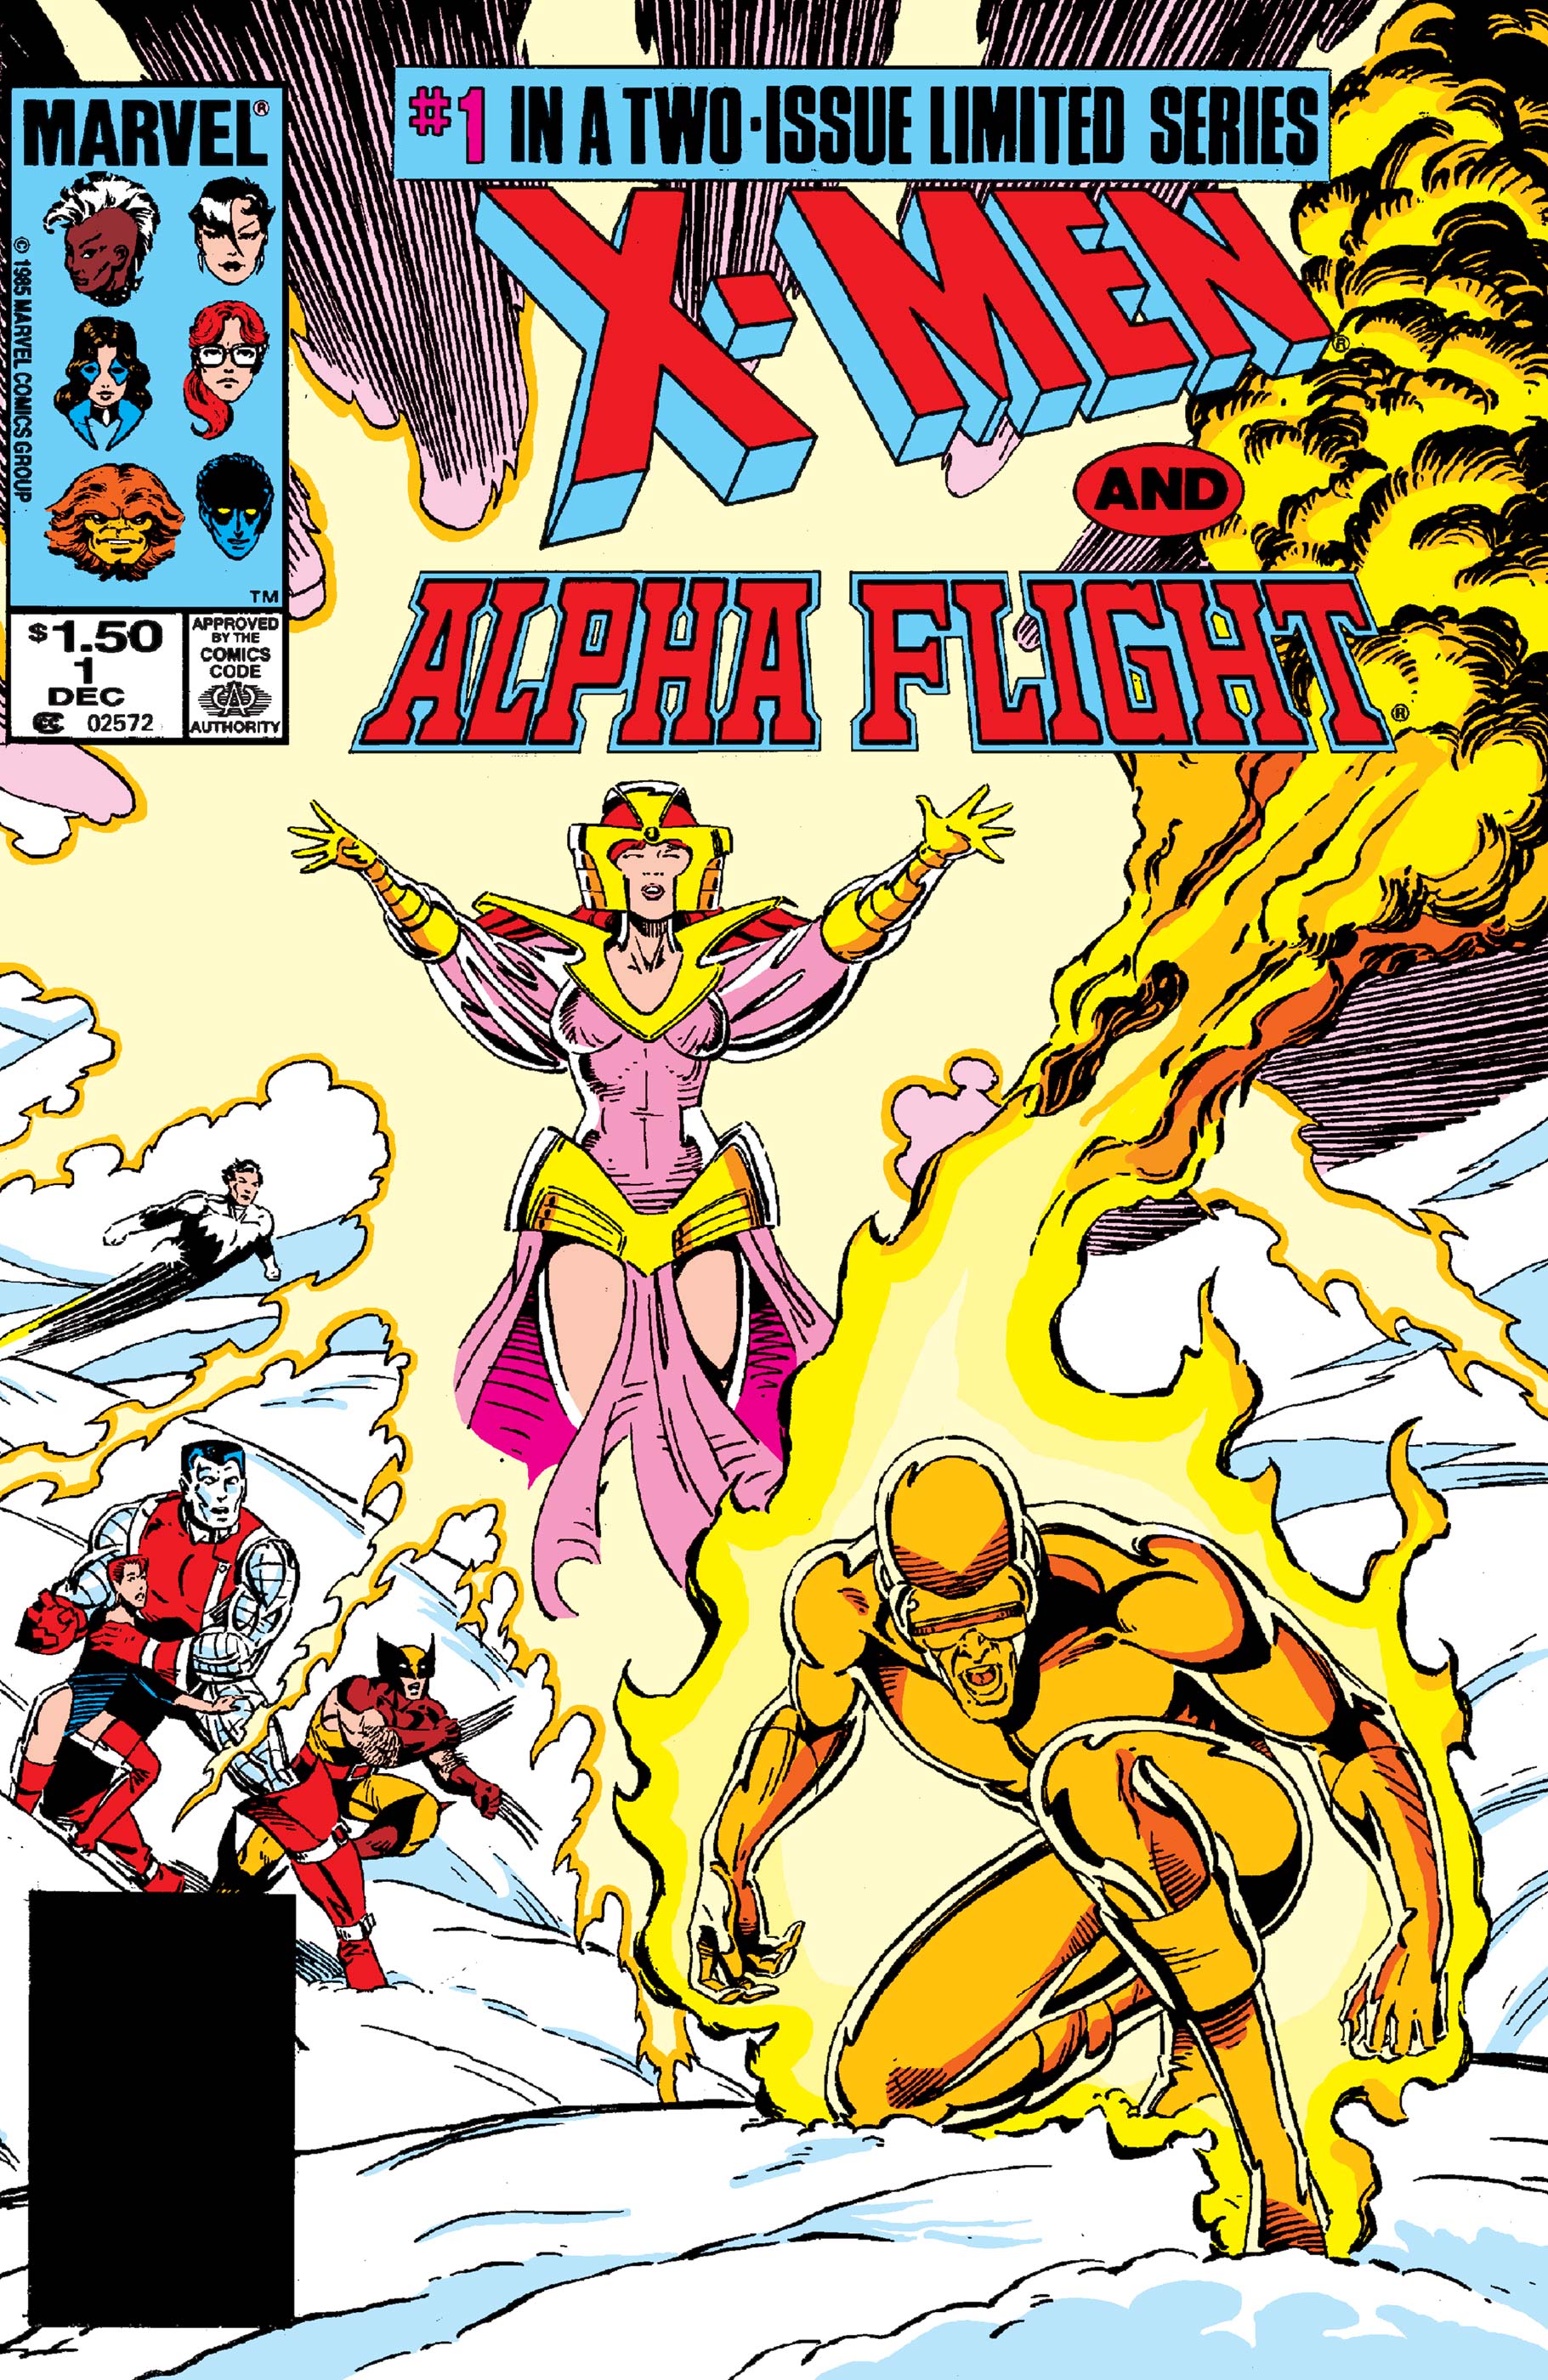 USA, 1985 of 2 Paul Smith, 52 pages X-Men and Alpha Flight # 1 